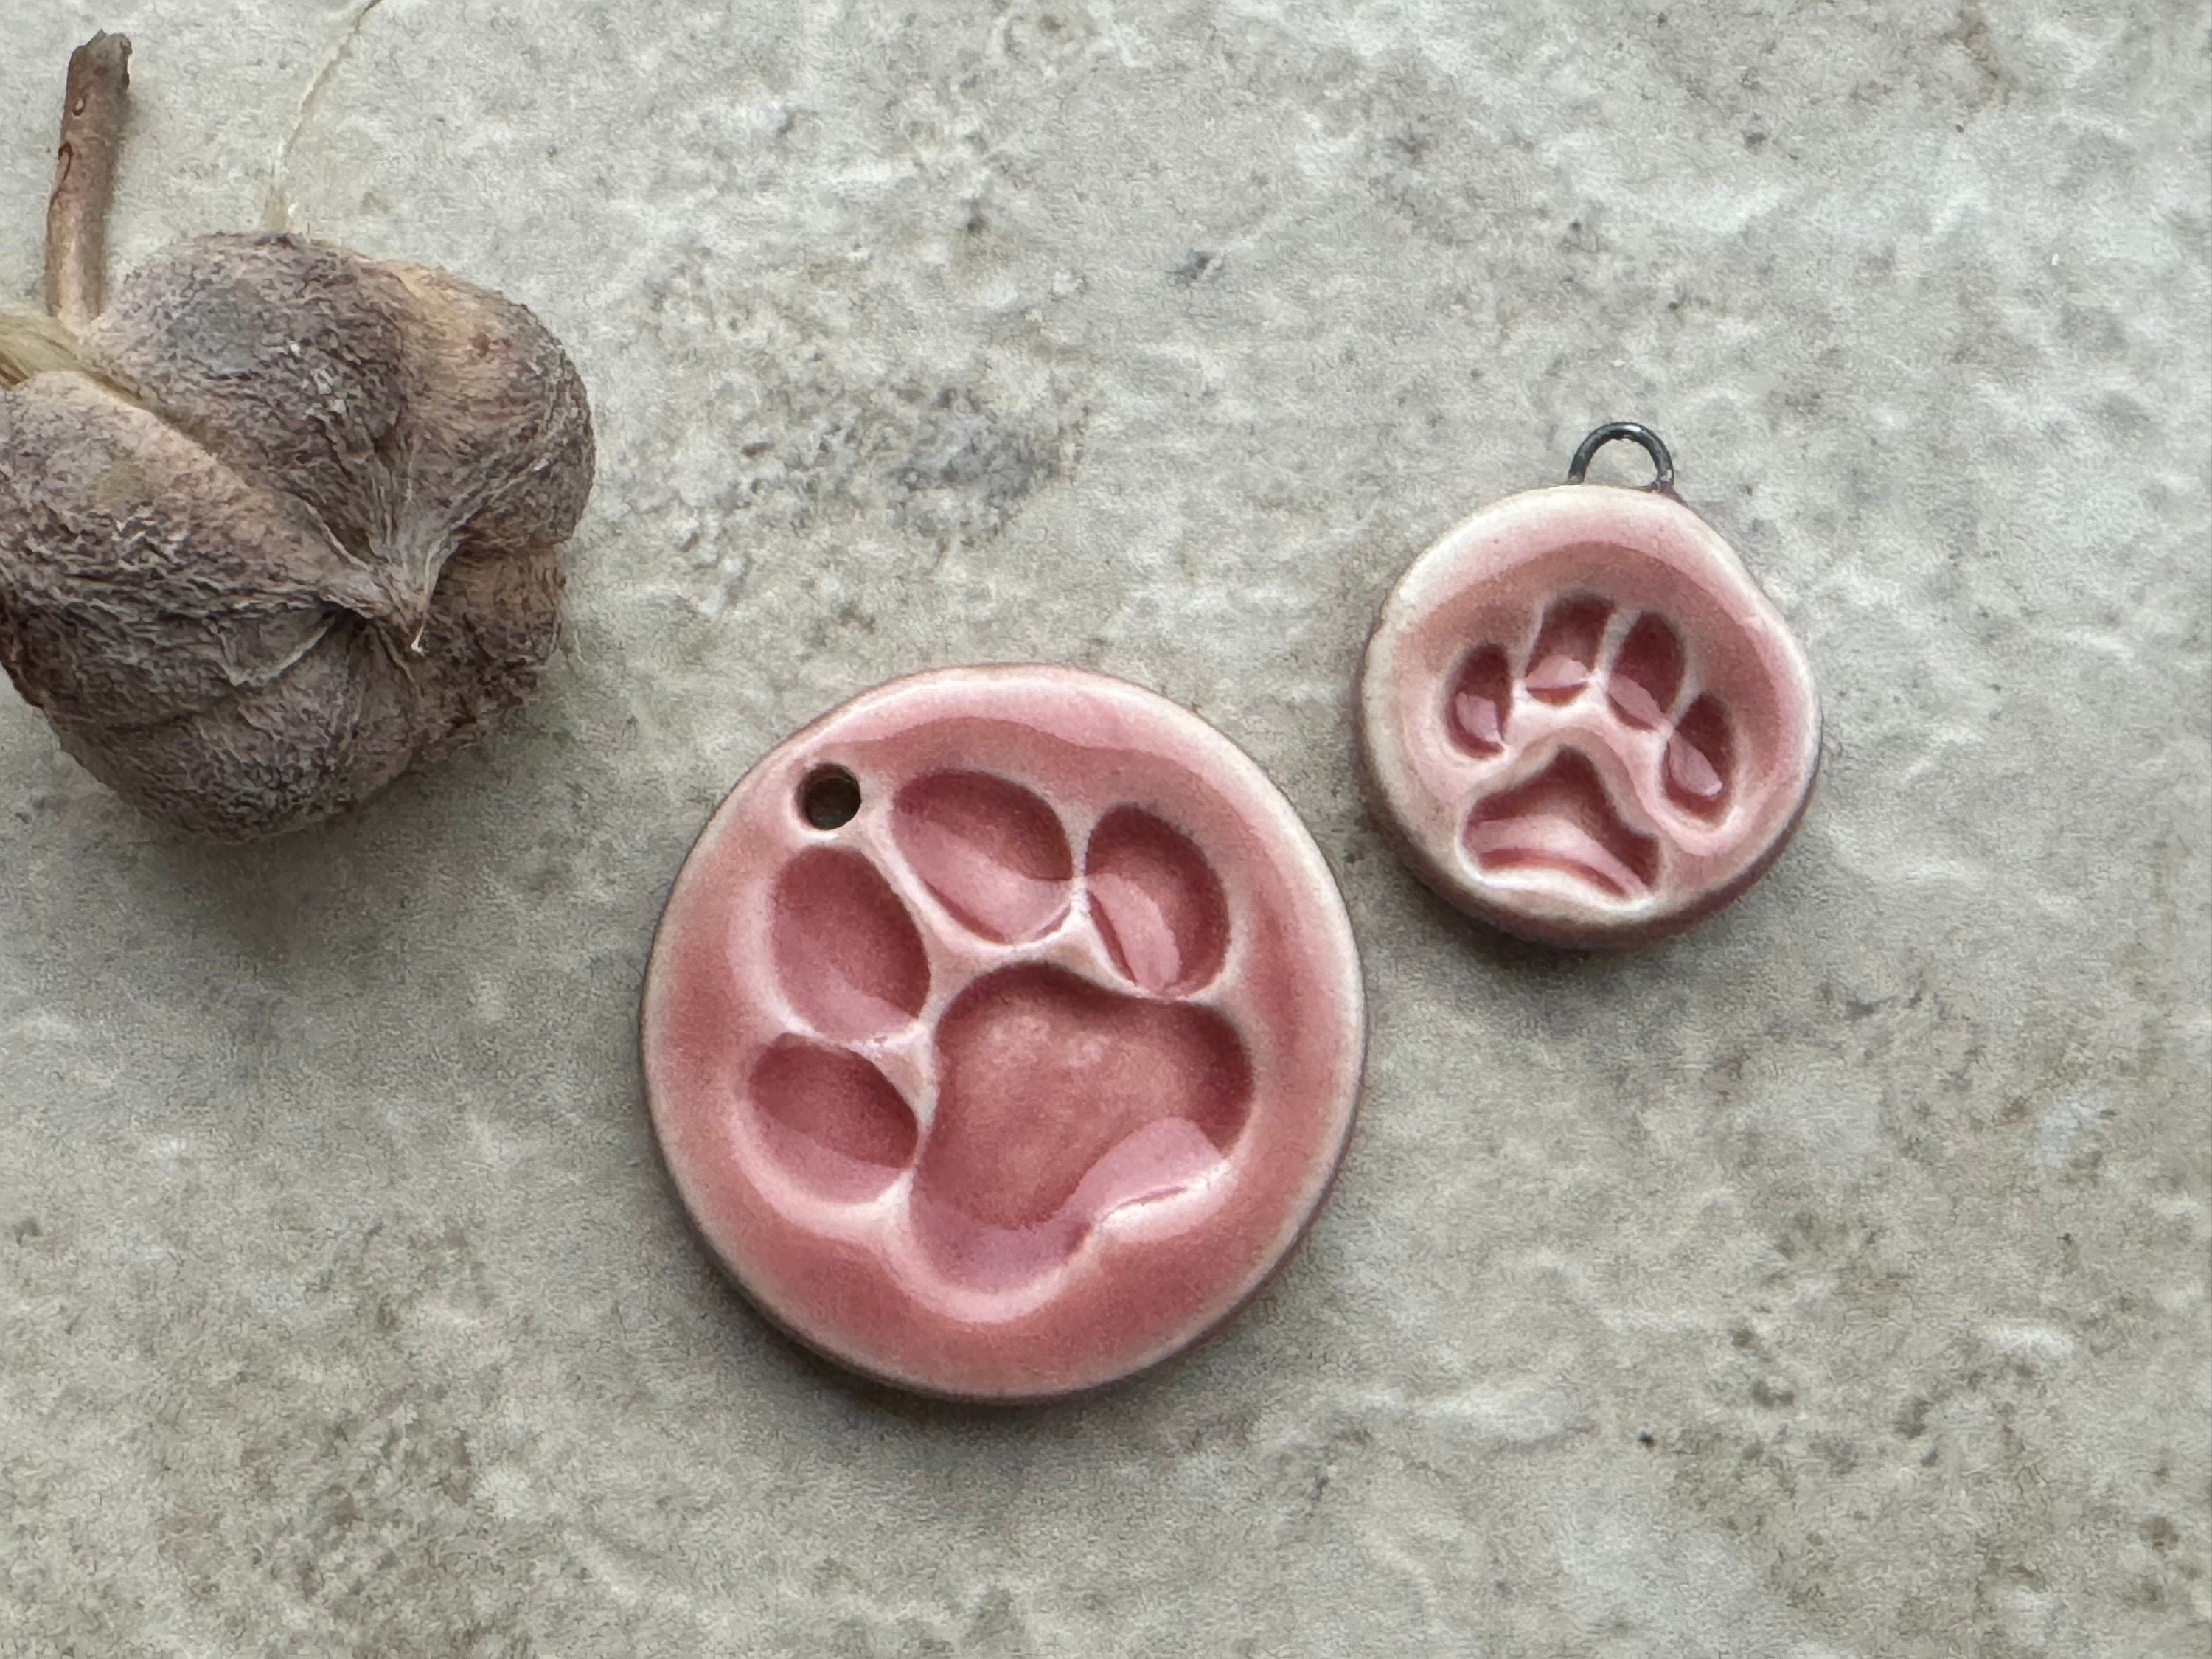 Pink Paw Print Pendant and Charms, Dog Round Pendant, Porcelain Ceramic Pendant, Dog Paw Charms, Jewelry Making Components